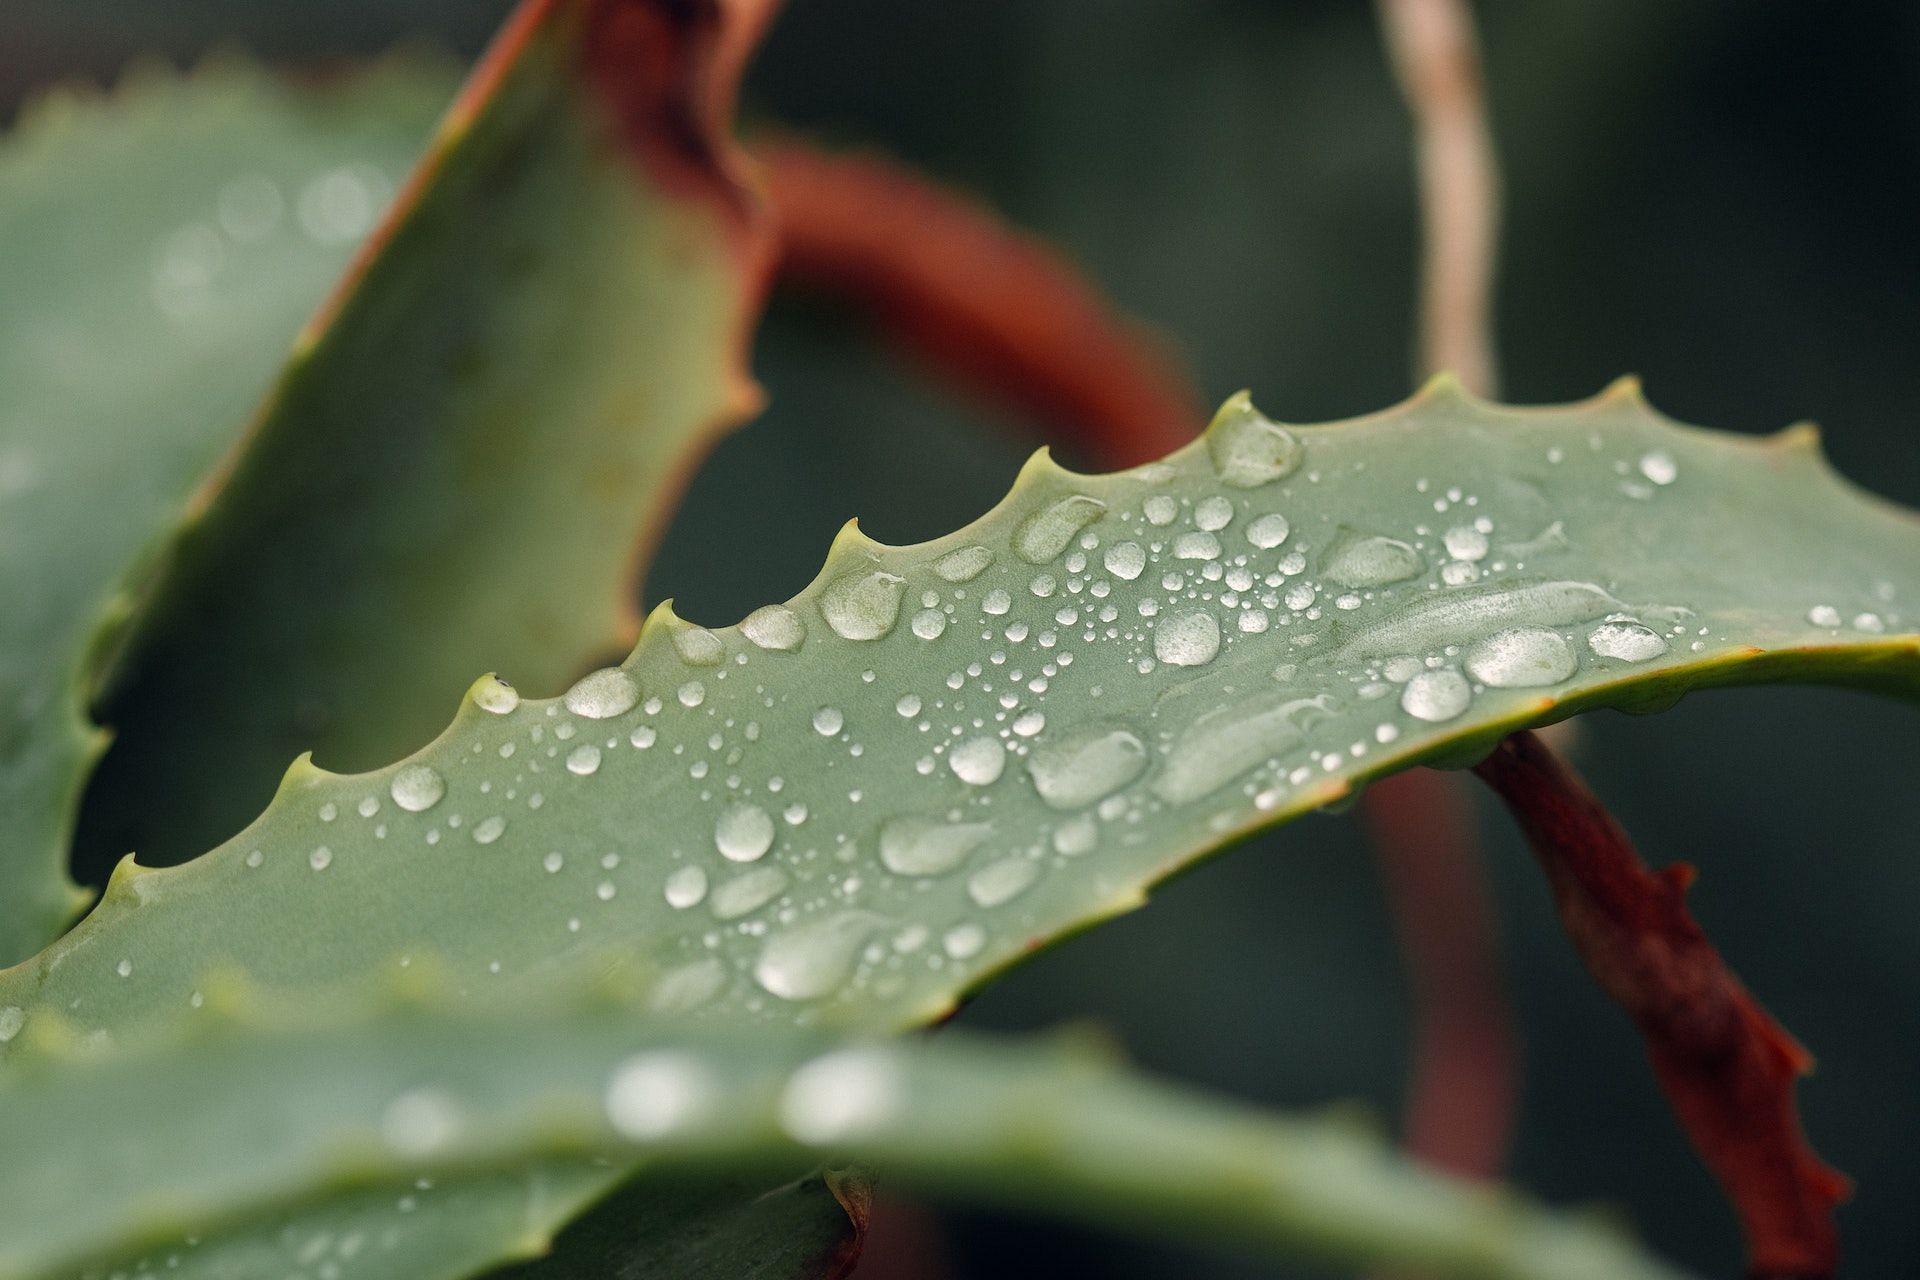 How to heal cuts fast? Use aloe vera to soothe inflammation. (Photo via Pexels/Griffin Wooldridge)